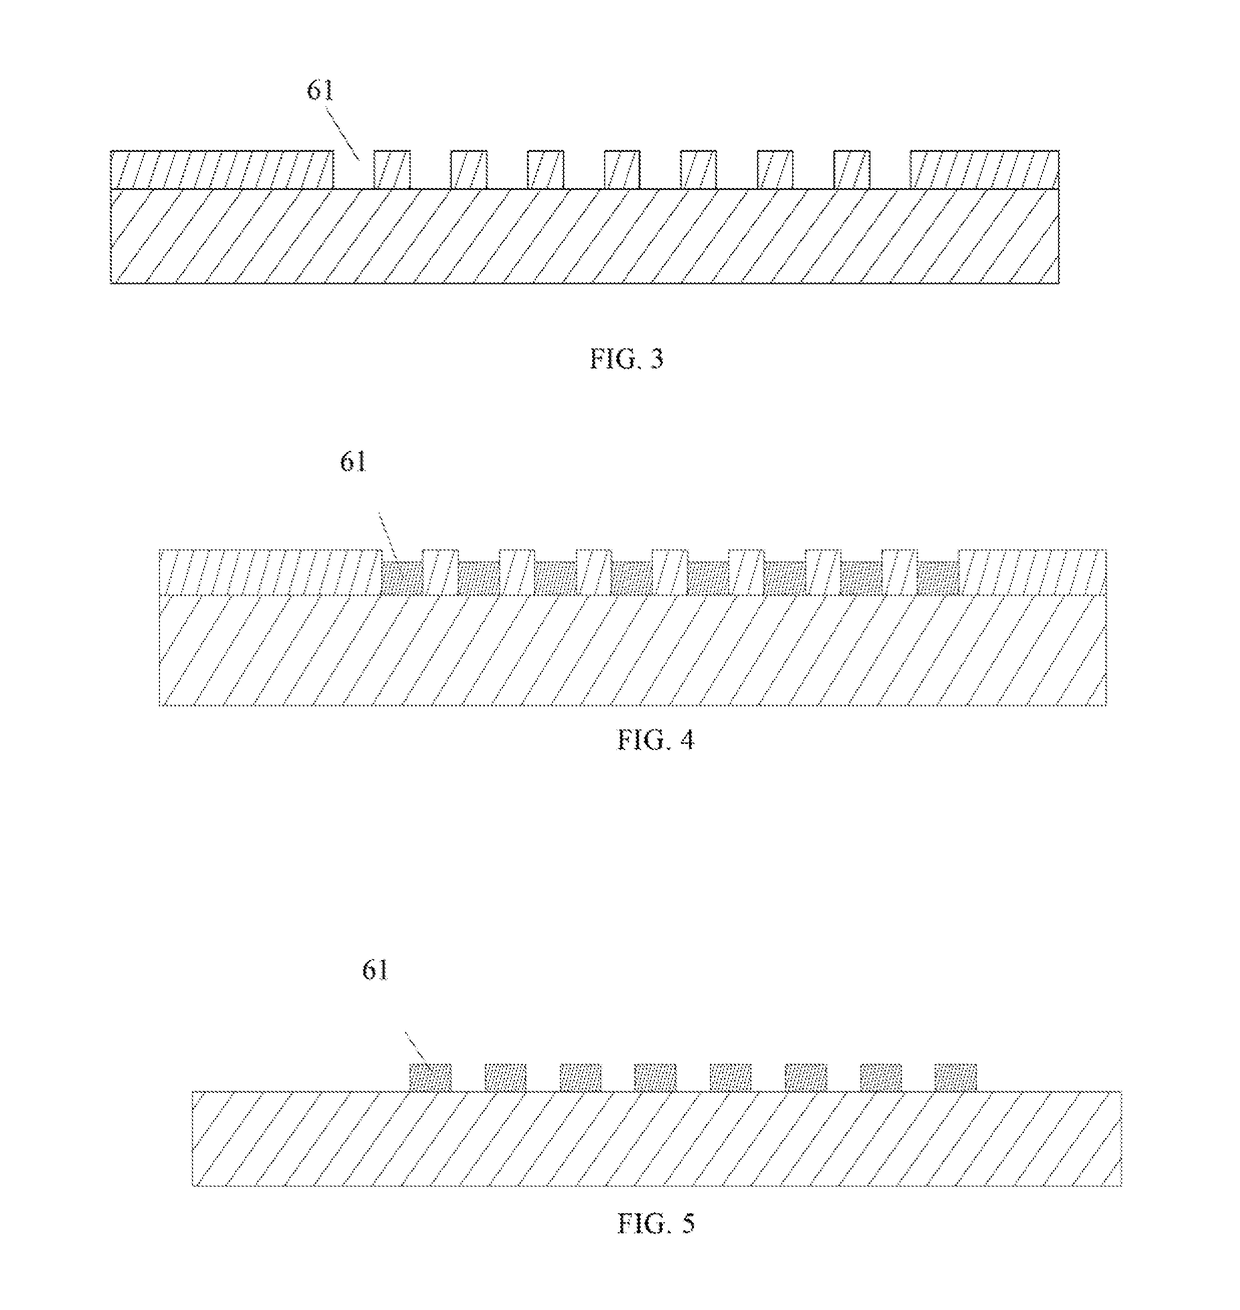 Fabricating method for wafer-level packaging